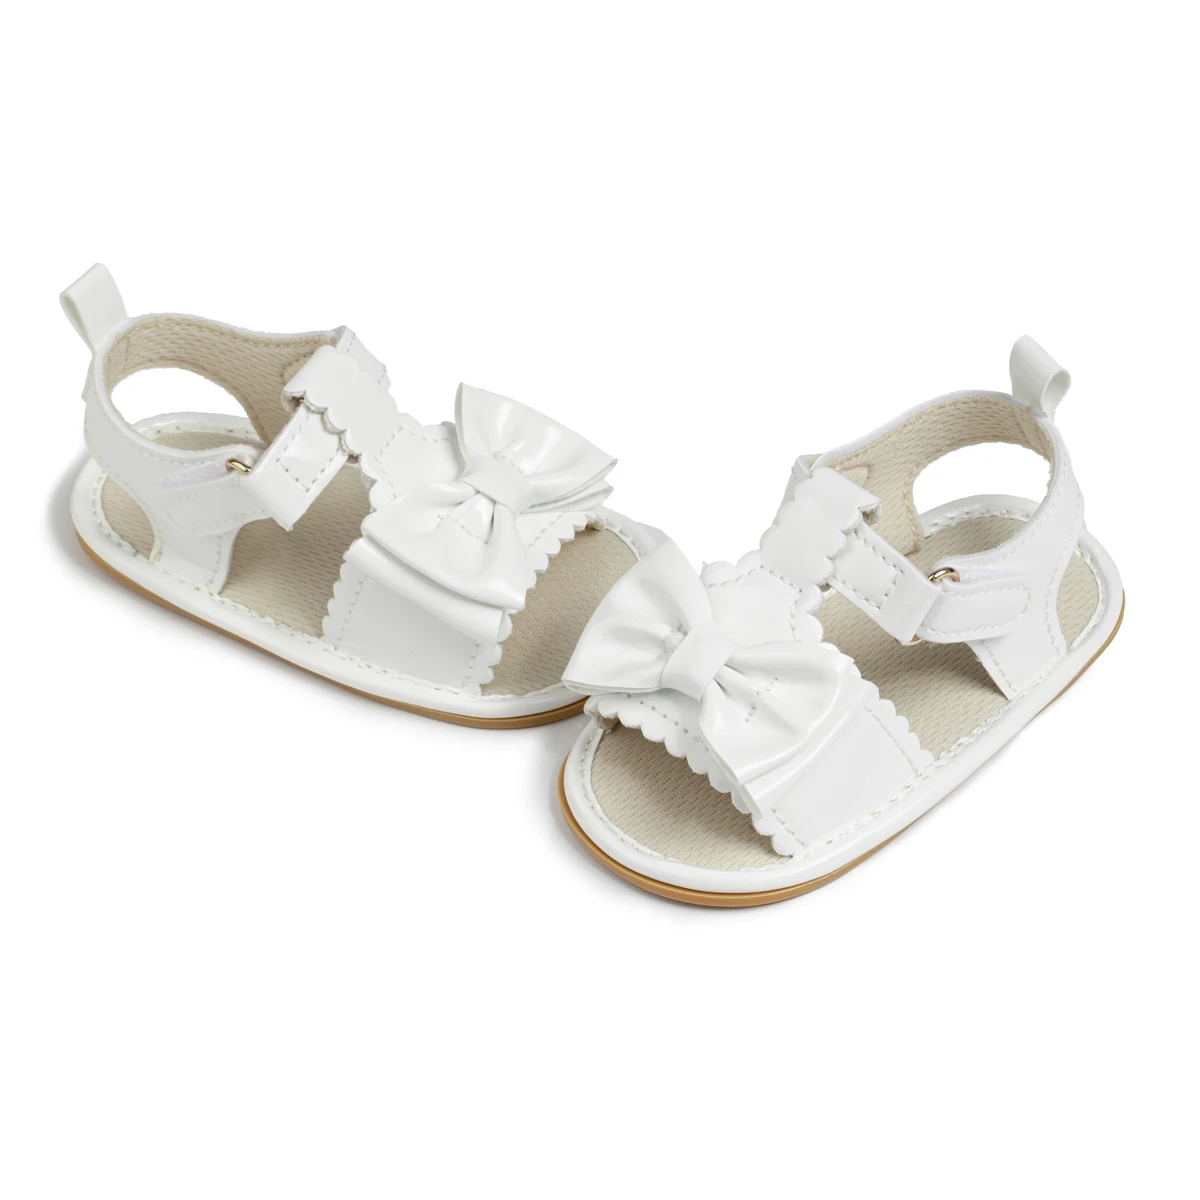 New Arrival Fashionable Breathable Baby Sandals & Slippers Footwear For Your Little One's Comfort Baby Shoes